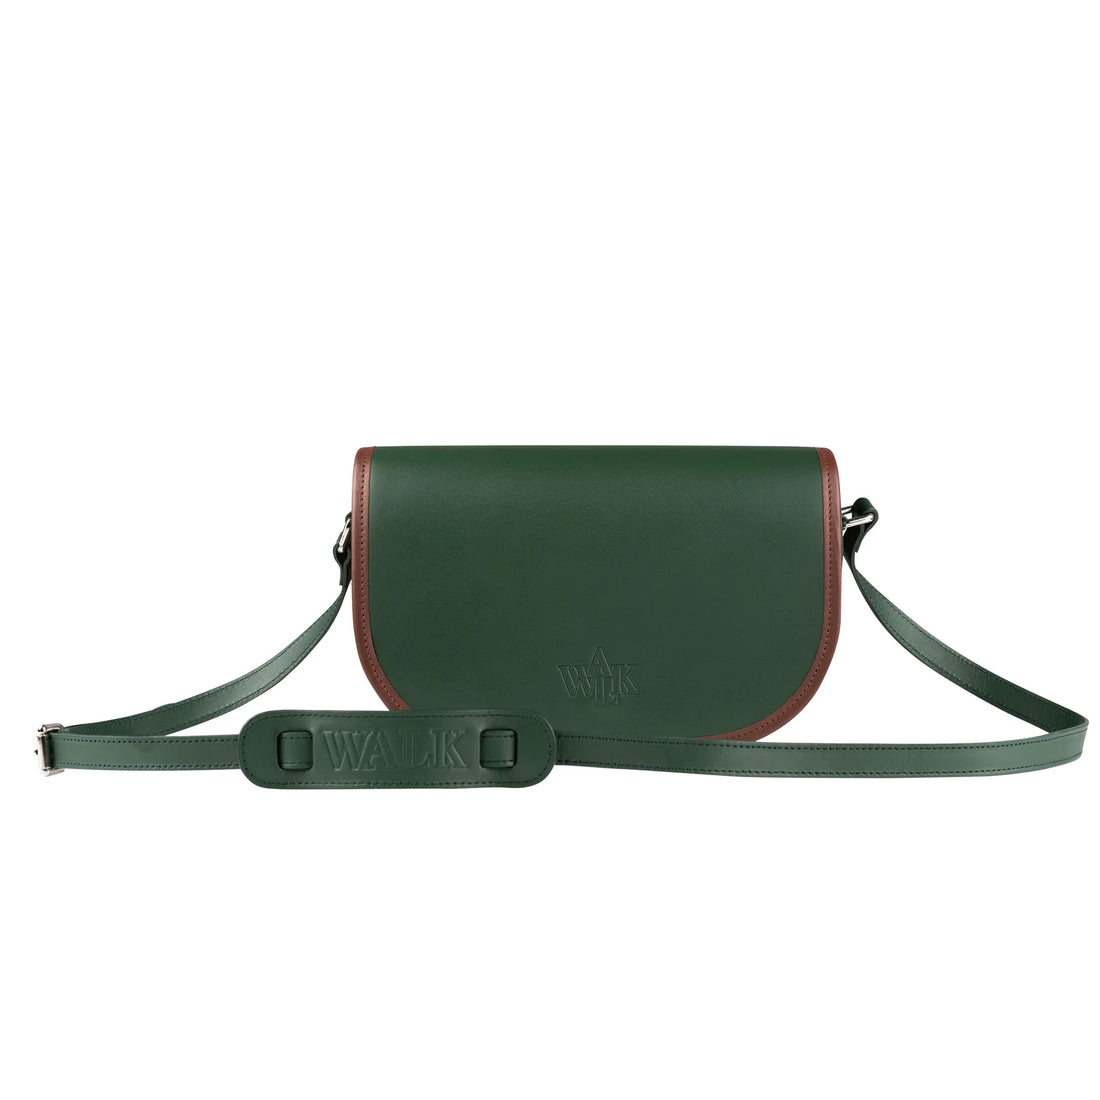 THE GREEN FOREST LEATHER BAG